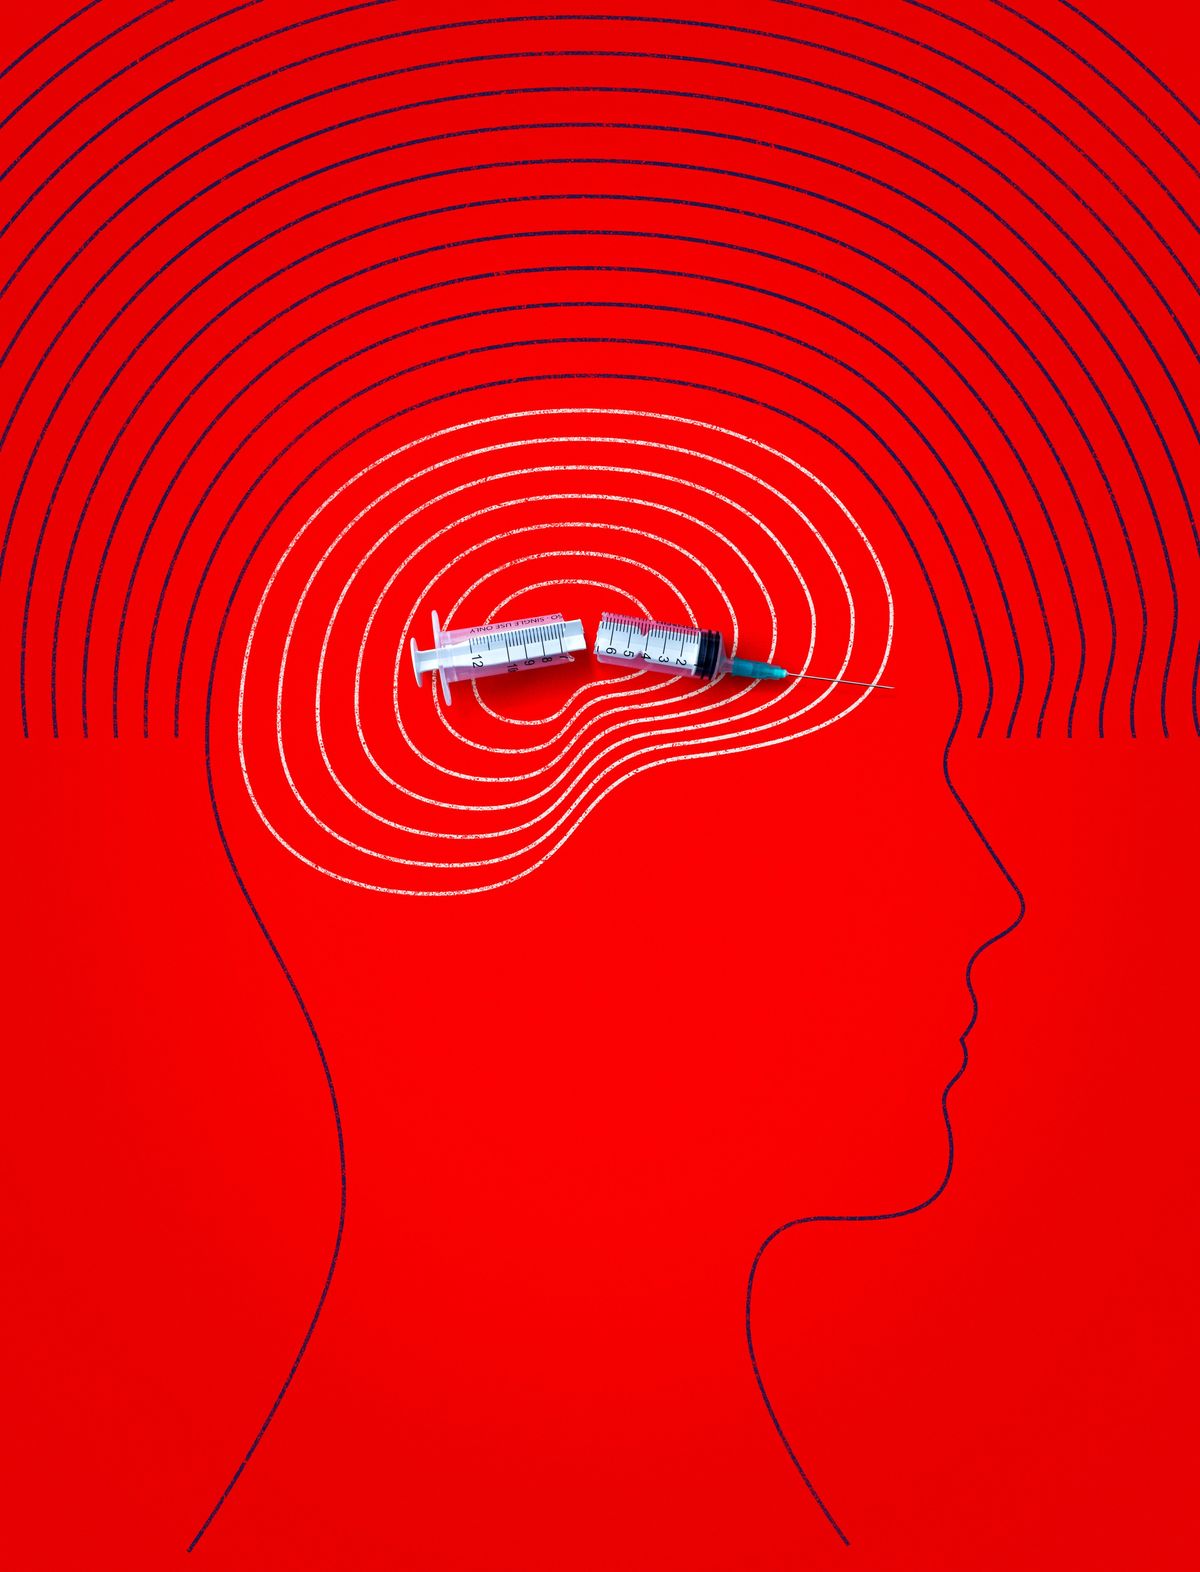 An illustration of person's head with a broken hypodermic needle.   